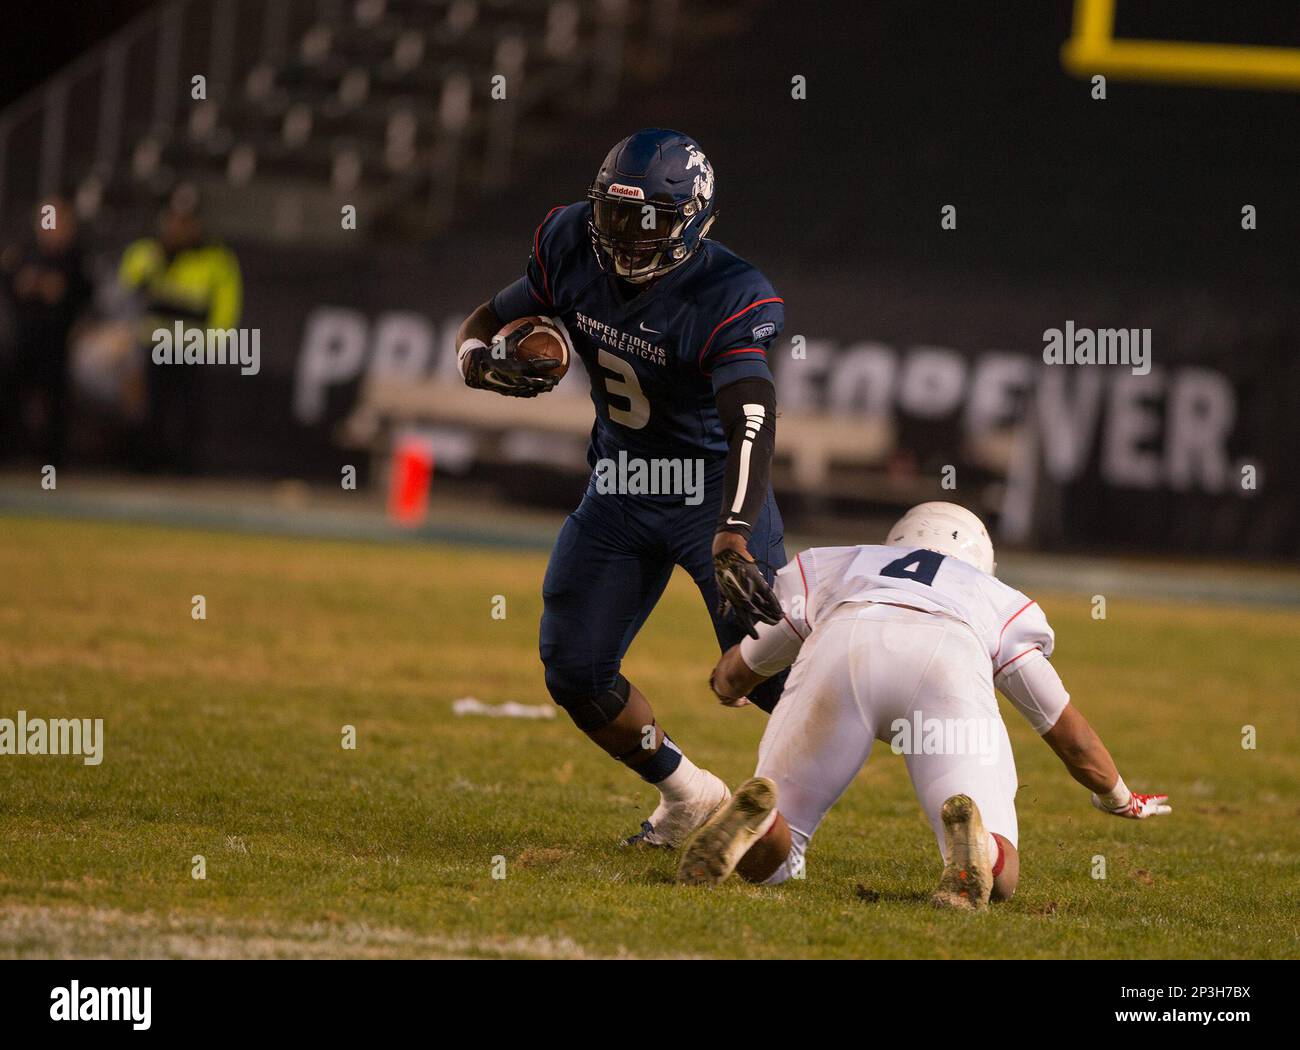 https://c8.alamy.com/comp/2P3H7BX/january-4-2015-carson-caeast-coast-blue-team-and-michigan-state-spartans-verbal-commit-running-back-3-larry-scott-tries-to-break-free-of-a-tackle-attempt-during-the-4th-annual-semper-fidelis-all-american-bowl-football-game-between-the-blue-team-from-the-east-coast-and-the-white-team-from-the-west-coast-at-the-stubhub-center-in-carson-california-the-east-coast-blue-team-defeated-the-west-coast-white-team-24-3-mandatory-credit-juan-lainez-marinmedia-cal-sport-media-cal-sport-media-via-ap-images-2P3H7BX.jpg